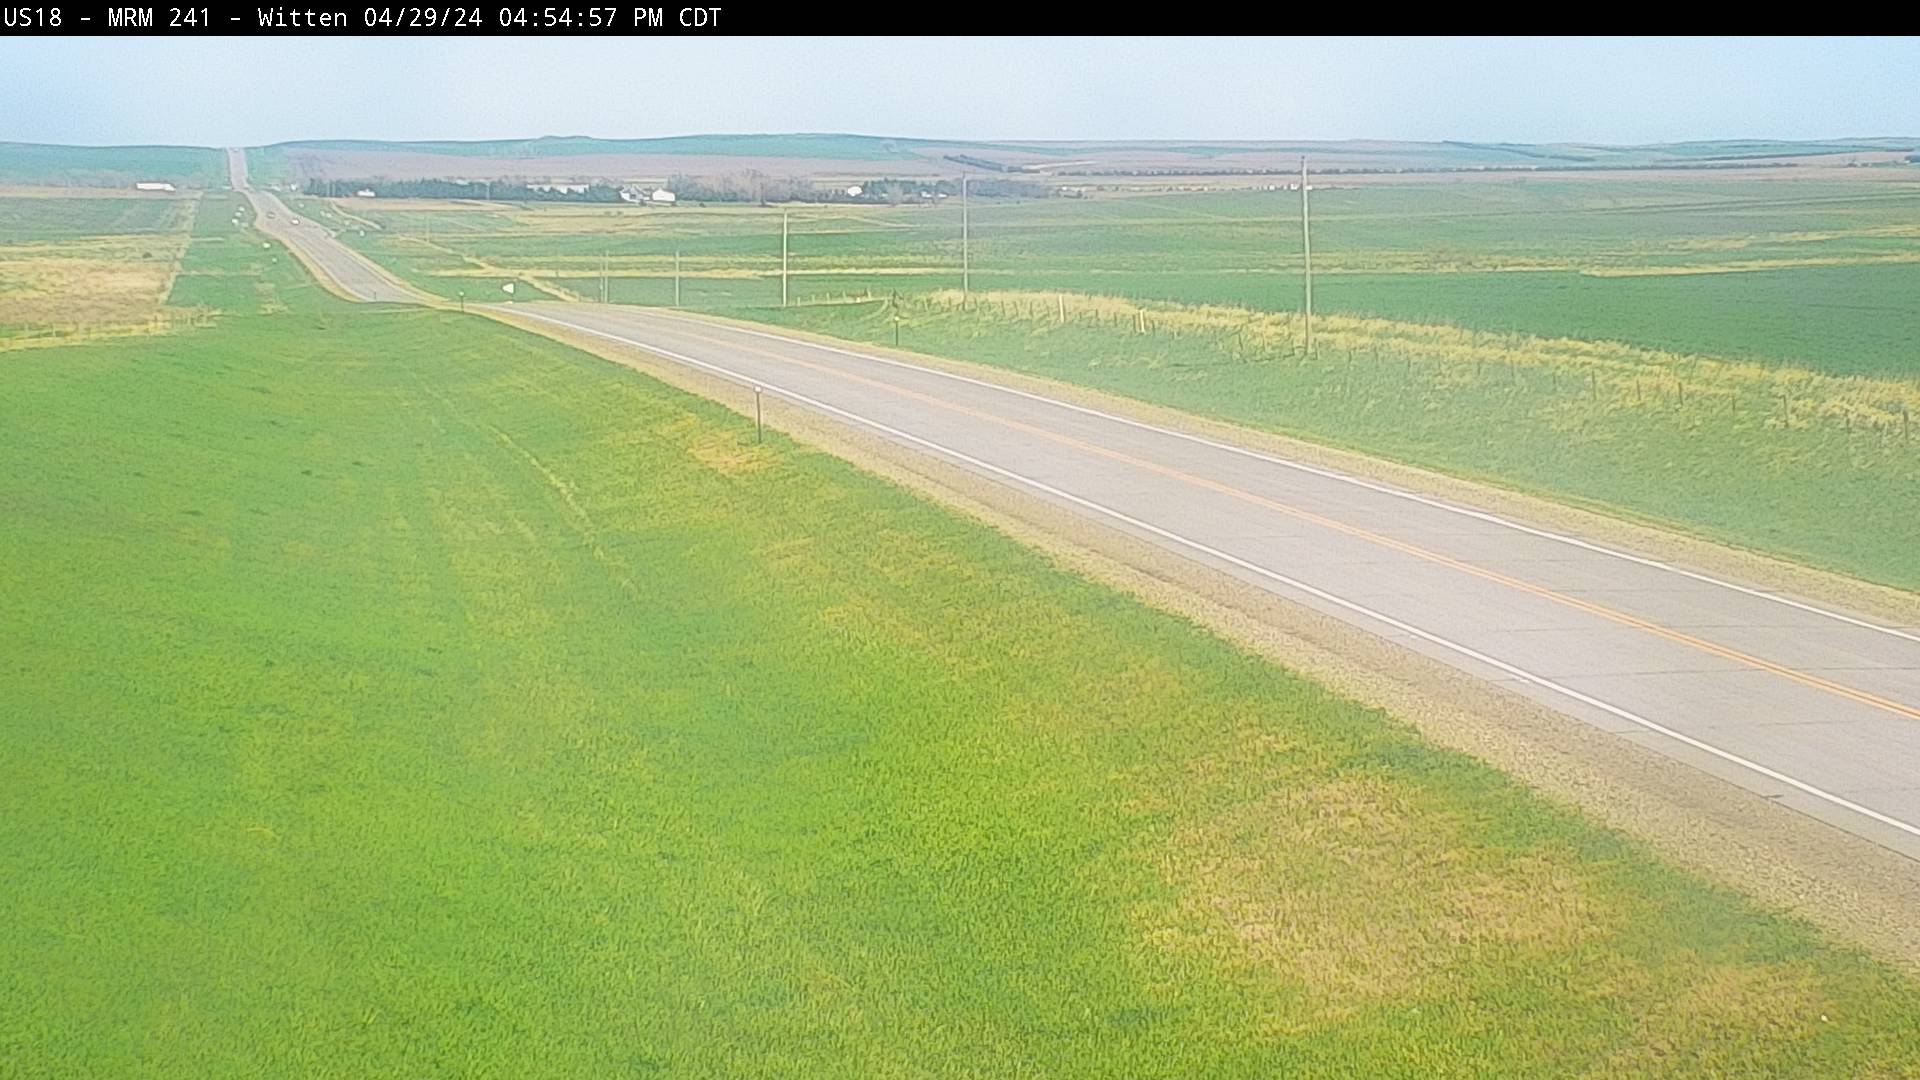 Traffic Cam 4 miles south of town along US-18 @ MP 241 - East Player